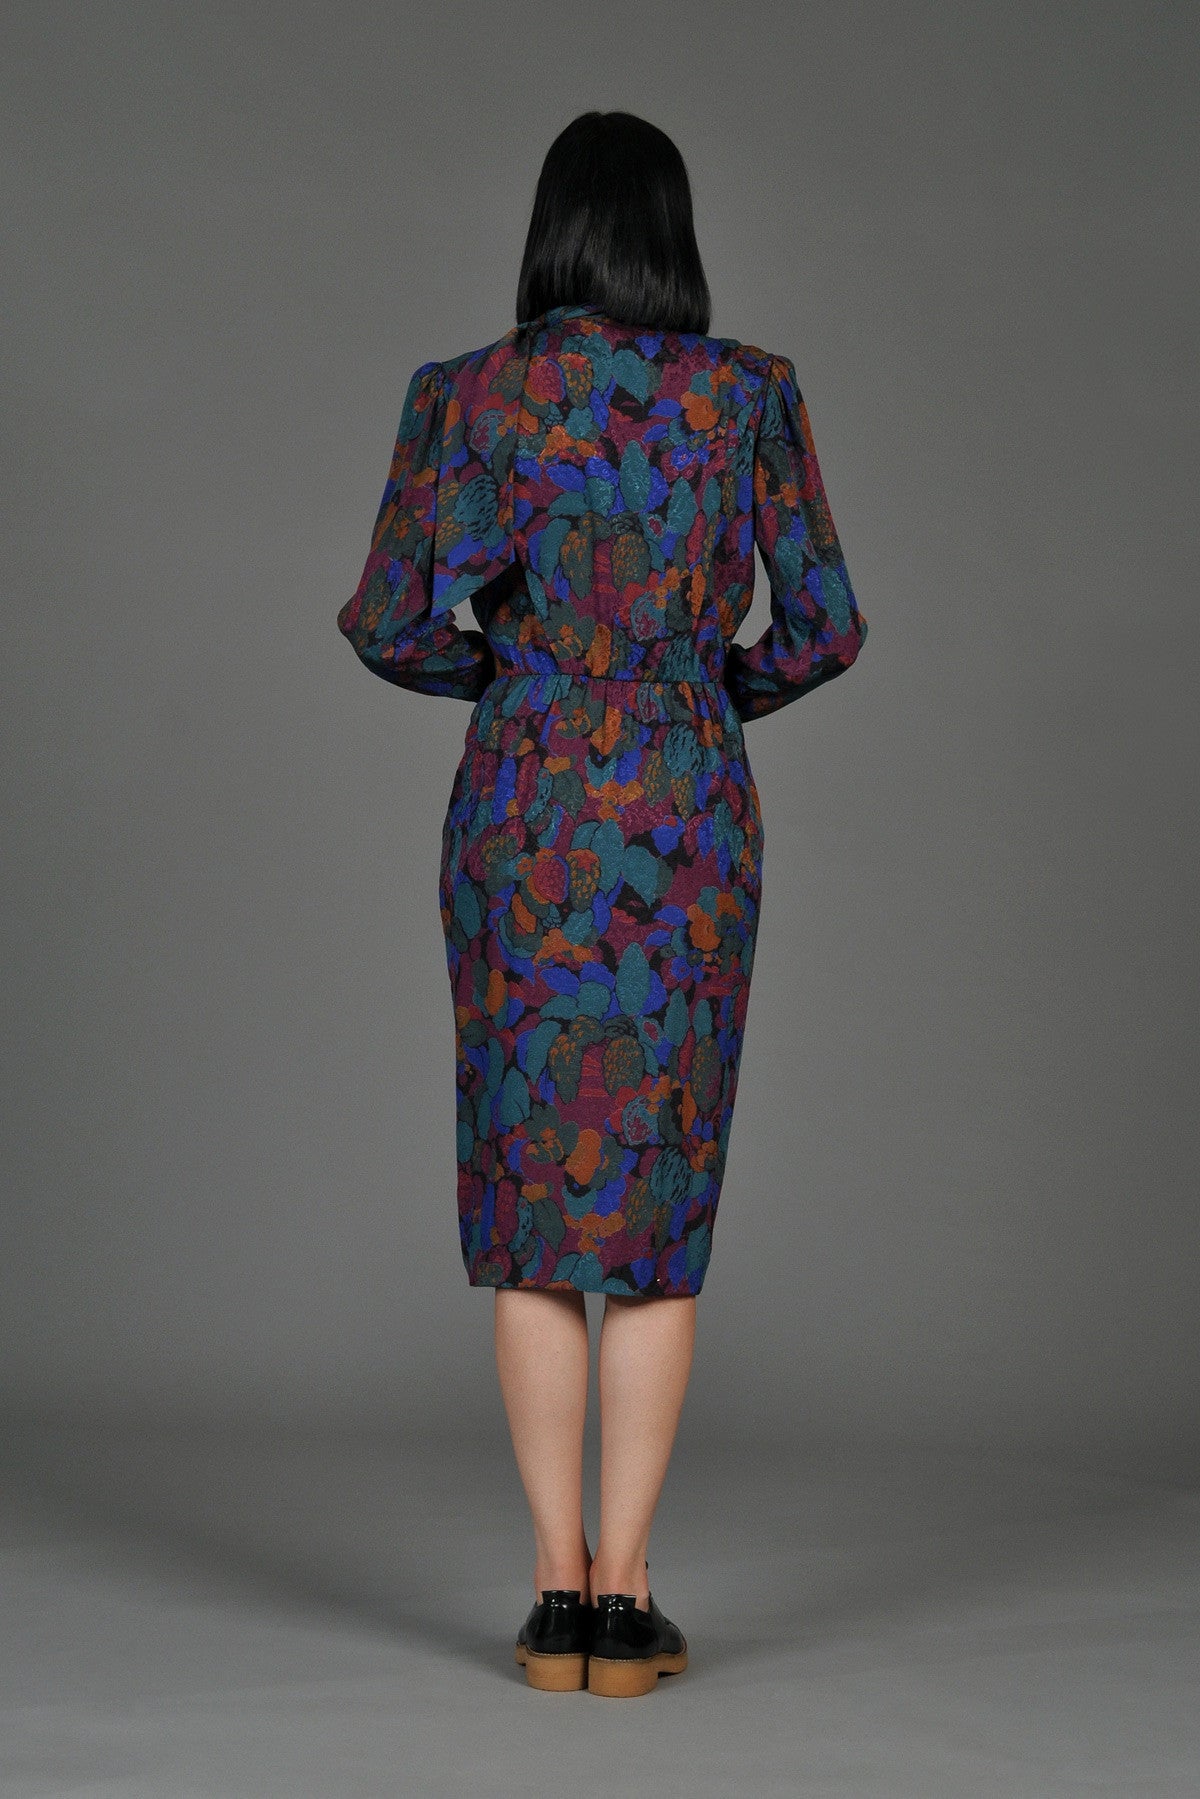 Ungaro 1980s Floral Silk Dress with Ascot | BUSTOWN MODERN